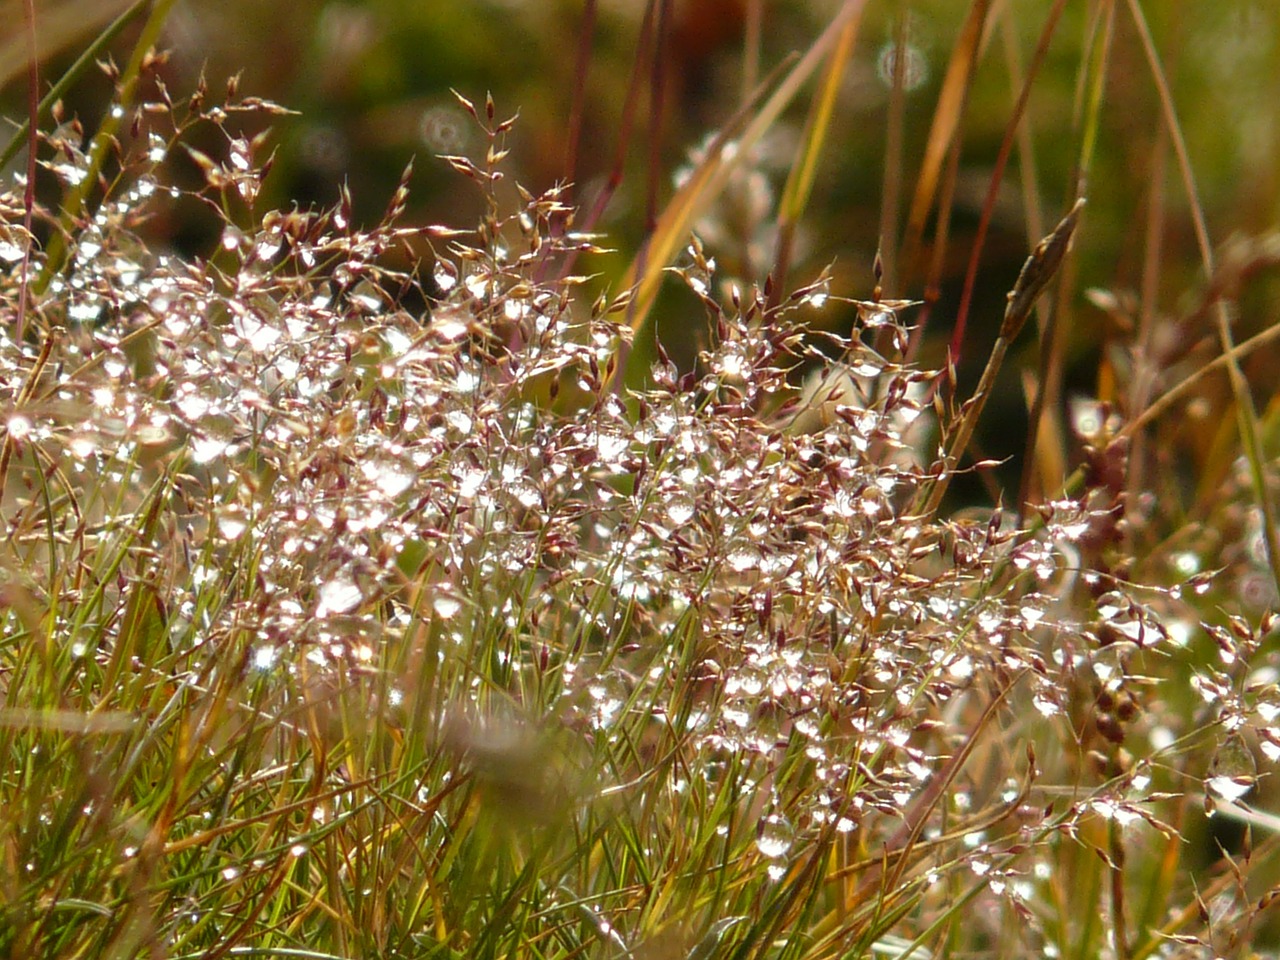 meadow,grass,dew,morgentau,back light,drip,dewdrop,raindrop,free pictures, free photos, free images, royalty free, free illustrations, public domain